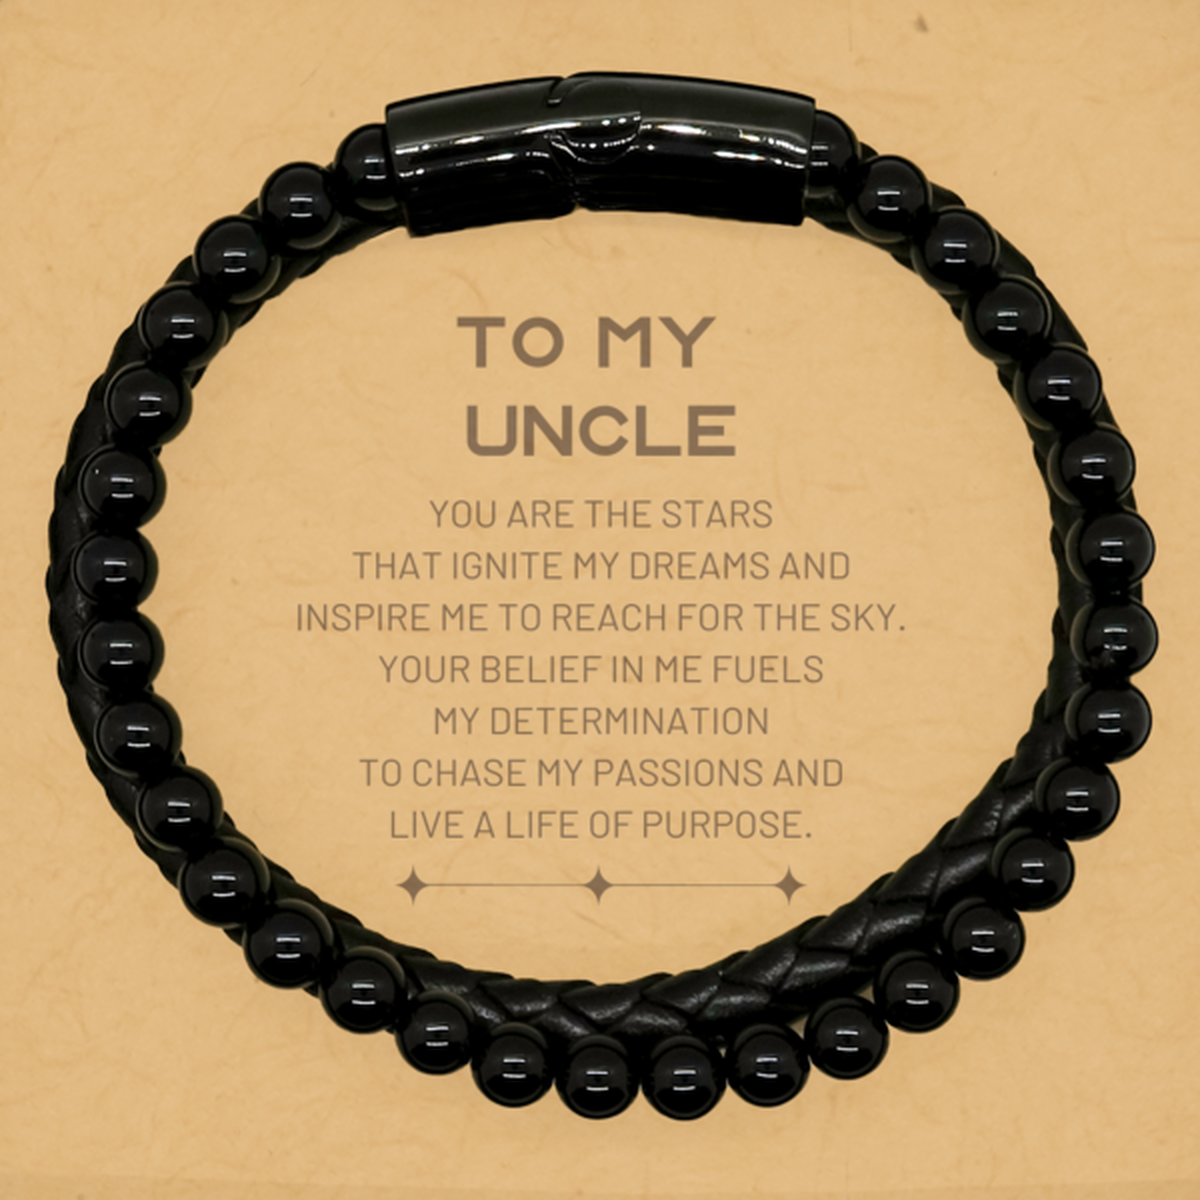 To My Uncle Stone Leather Bracelets, You are the stars that ignite my dreams and inspire me to reach for the sky, Birthday Unique Gifts For Uncle, Thank You Gifts For Uncle